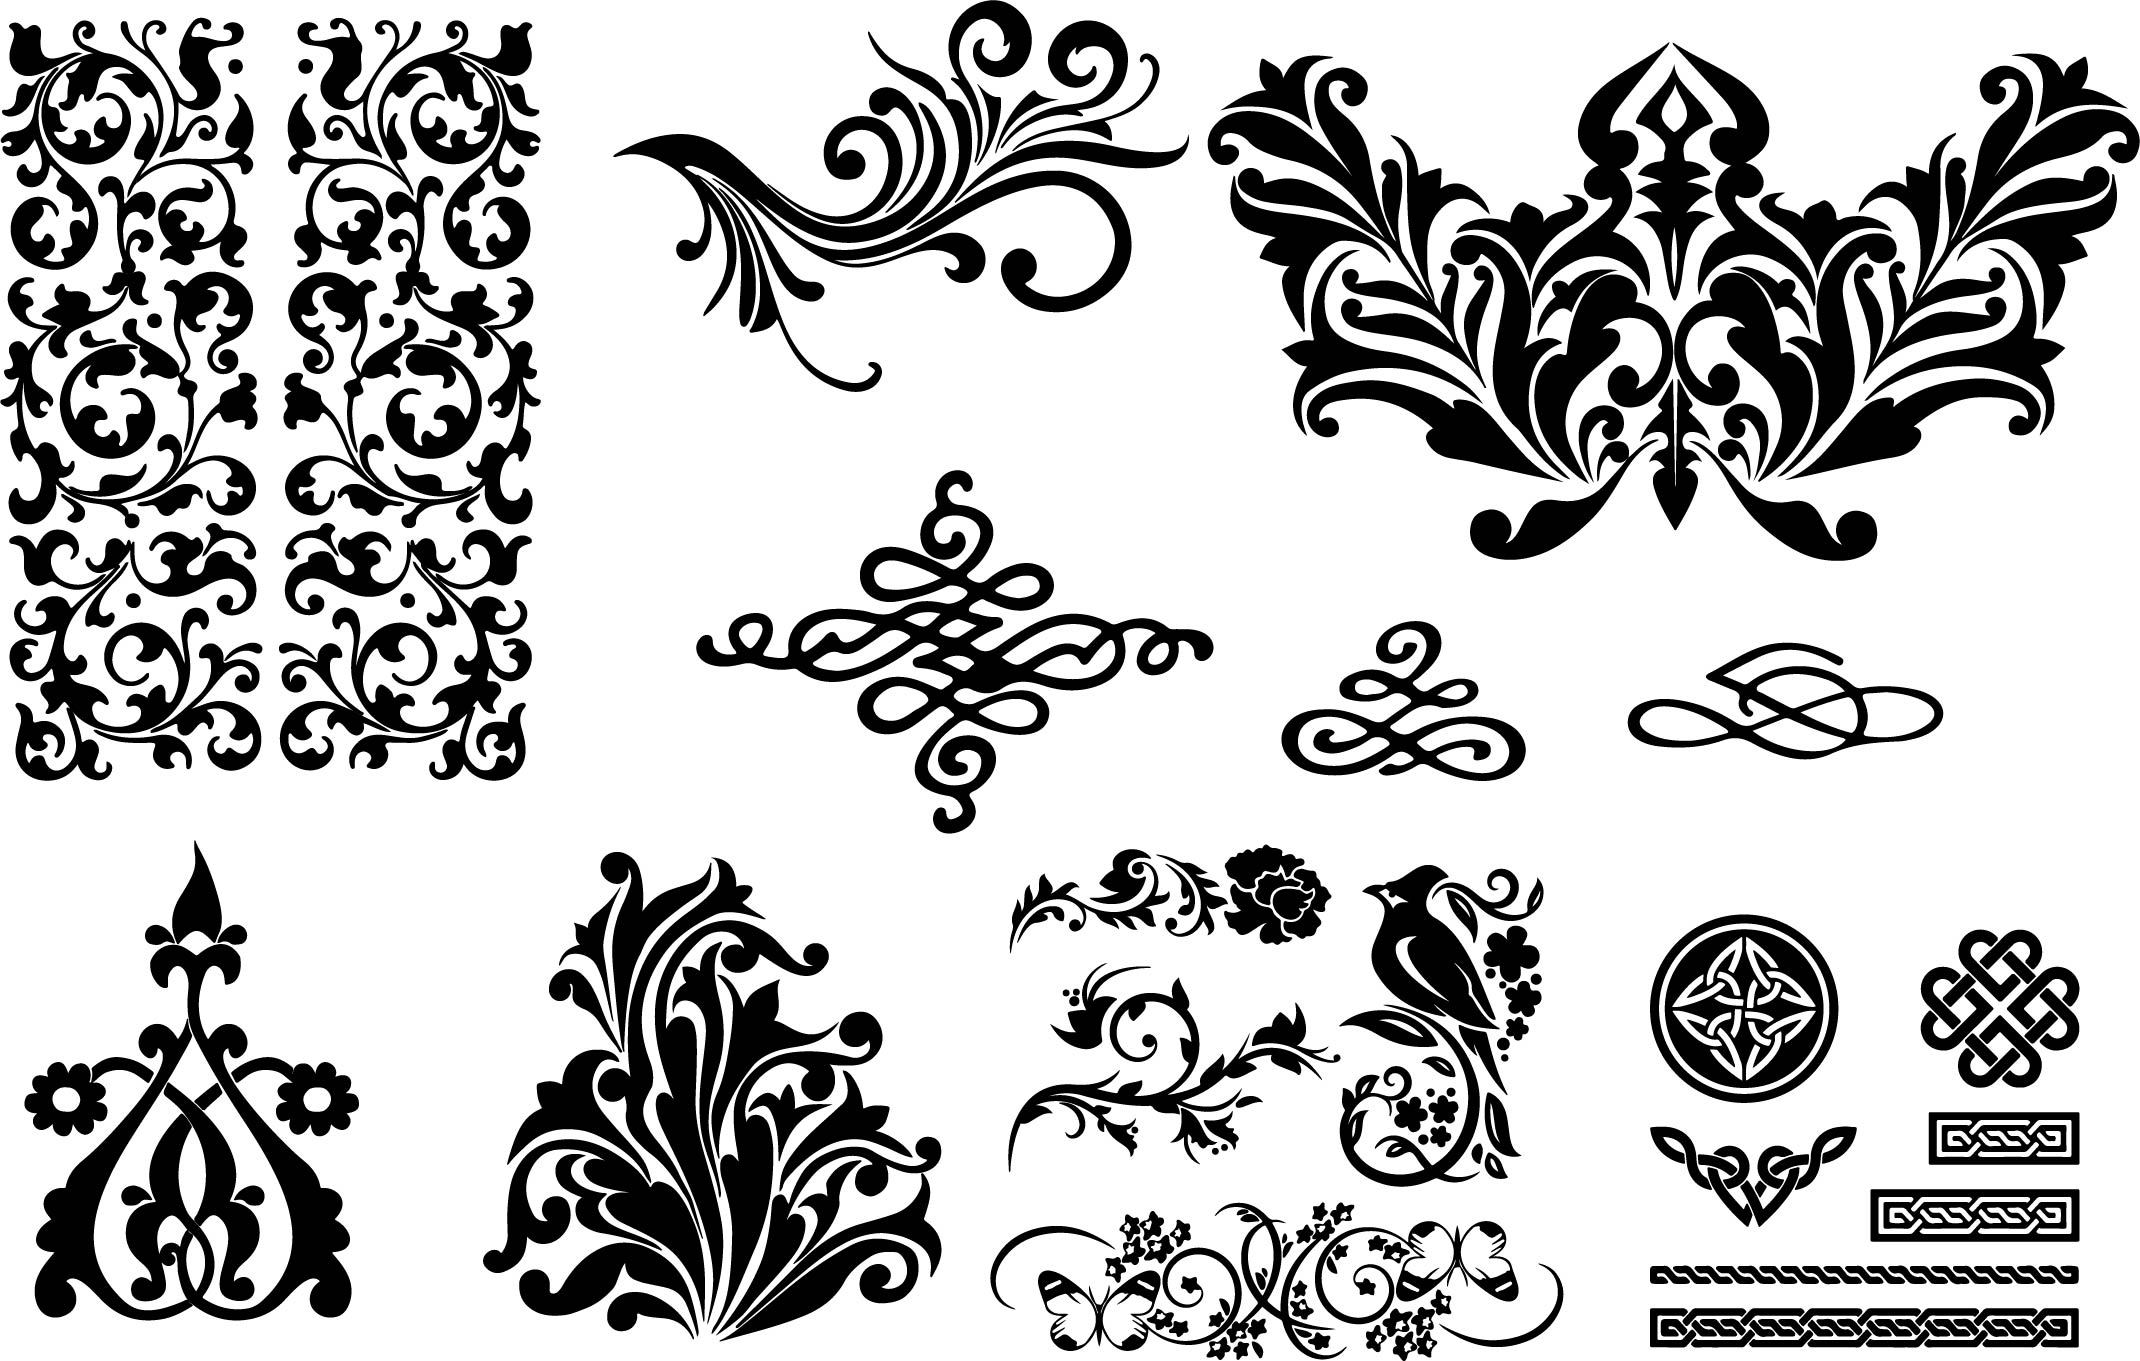 Seamless Swirl Patterns (.eps) Free Vector Download - 3axis.co
 Vintage Swirl Patterns